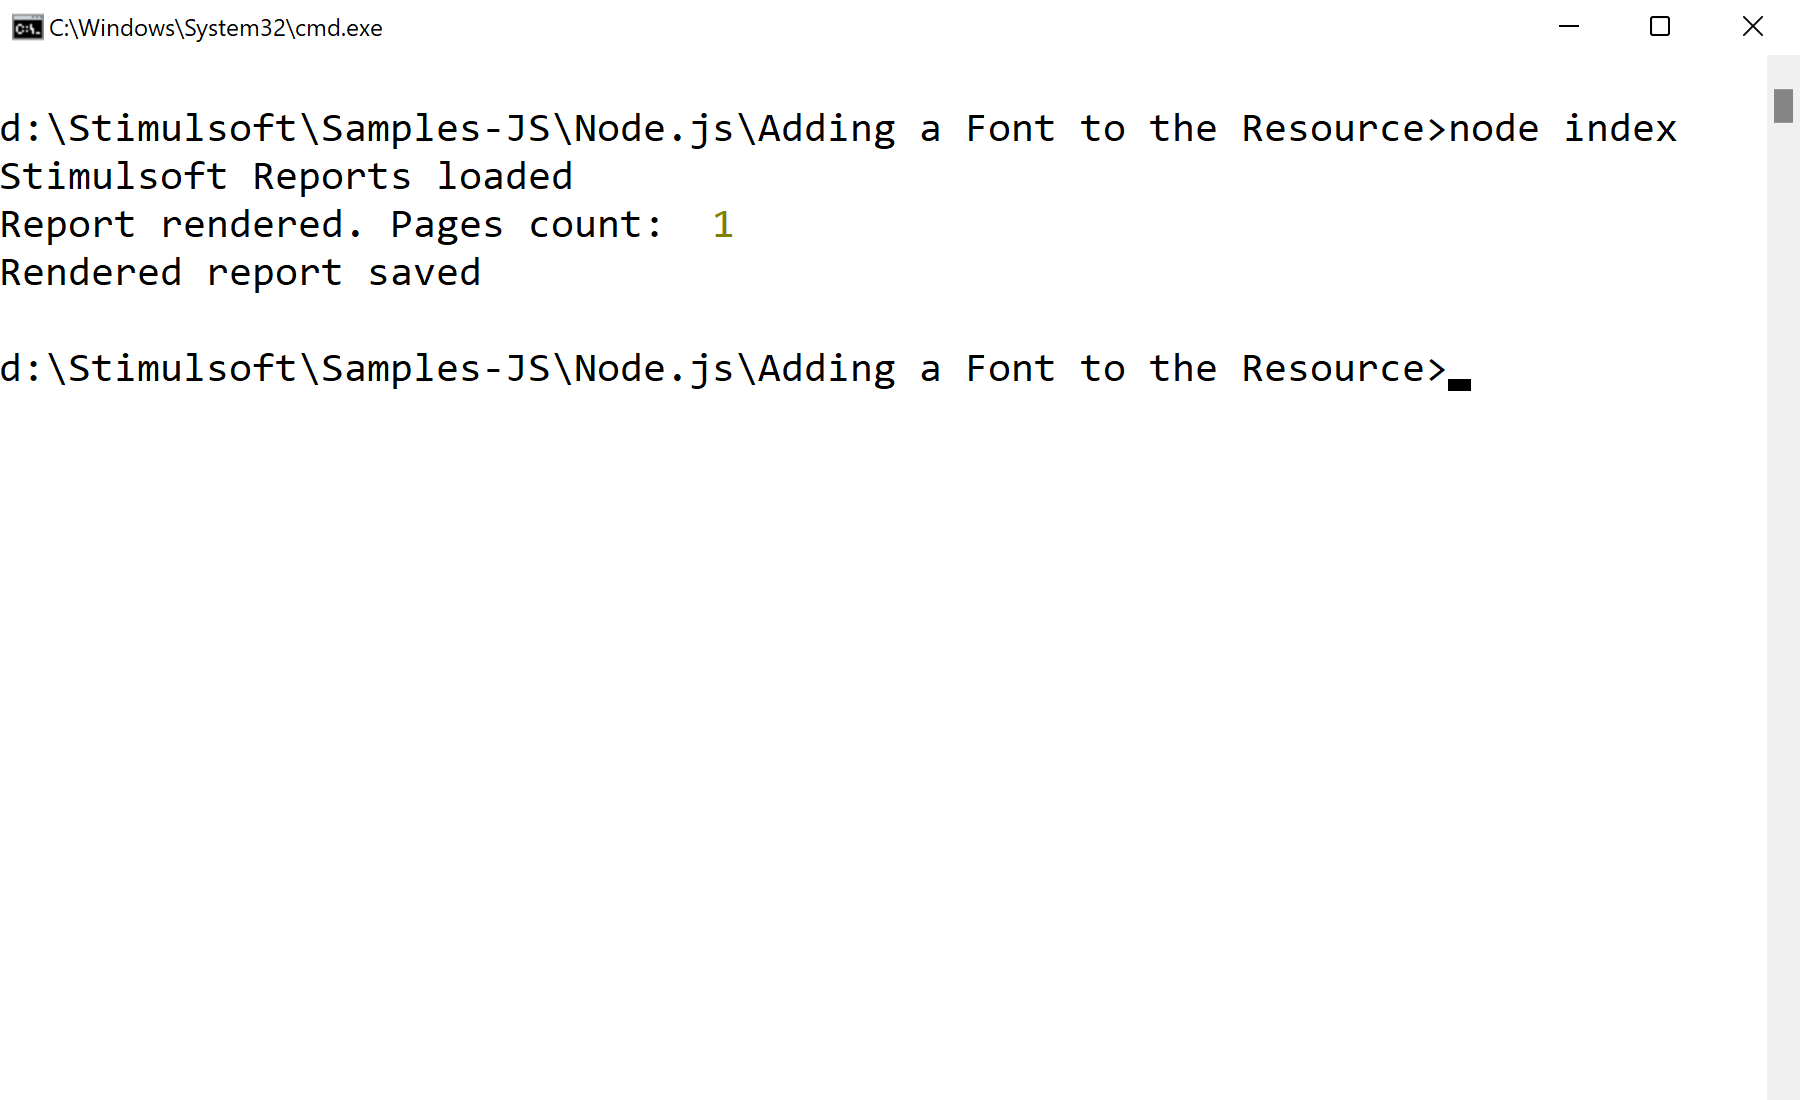 Adding a Font to the Resource